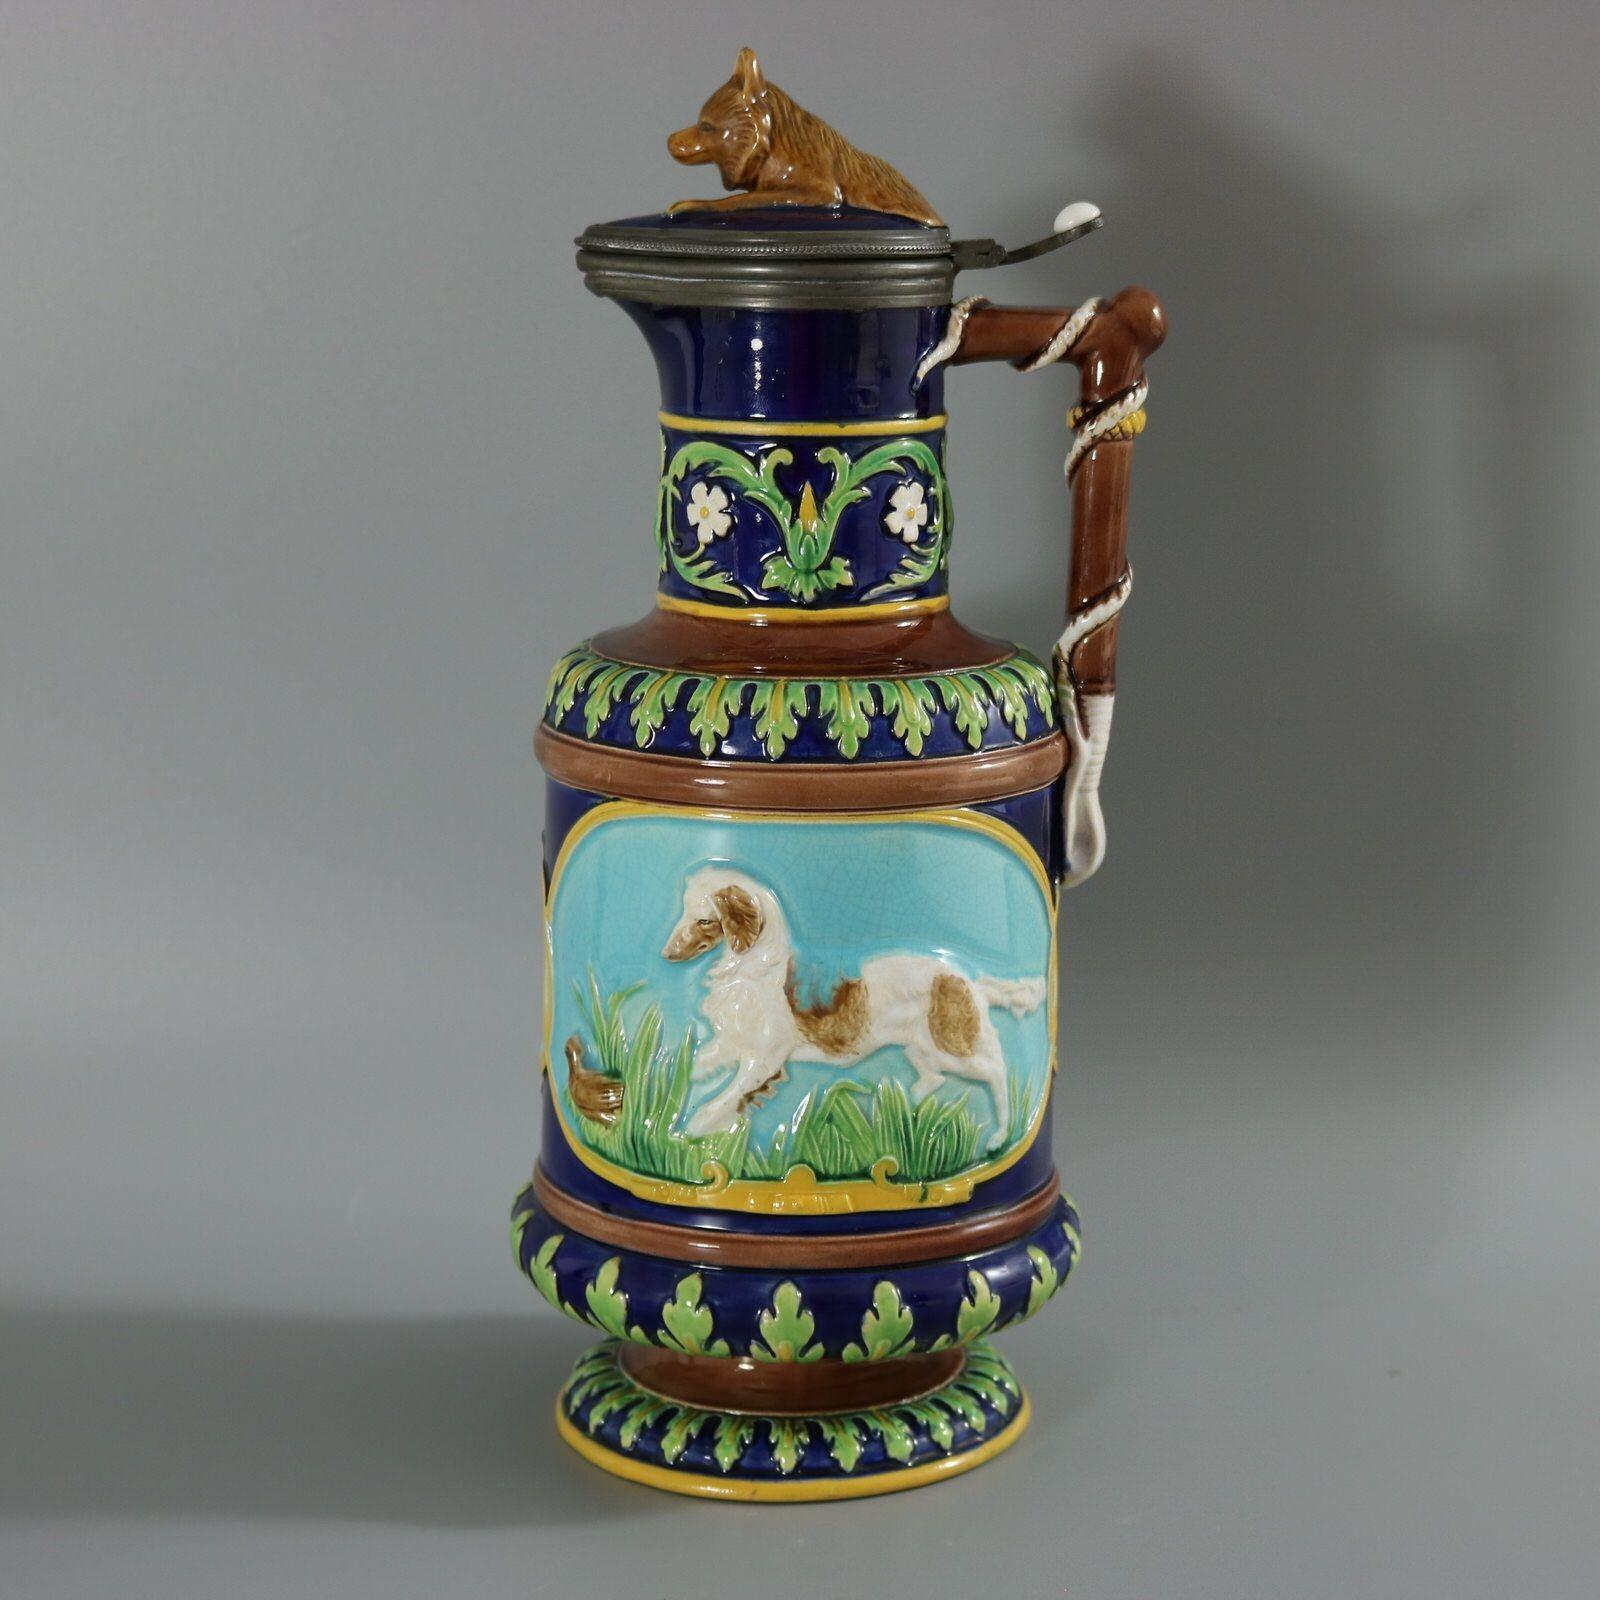 George Jones Majolica jug/pitcher with lid which features pictorial panels on either side, one depicts a retriever chasing a quail, the other a fox waiting to pounce on a rabbit. Colouration: turquoise, blue, green, are predominant. English diamond